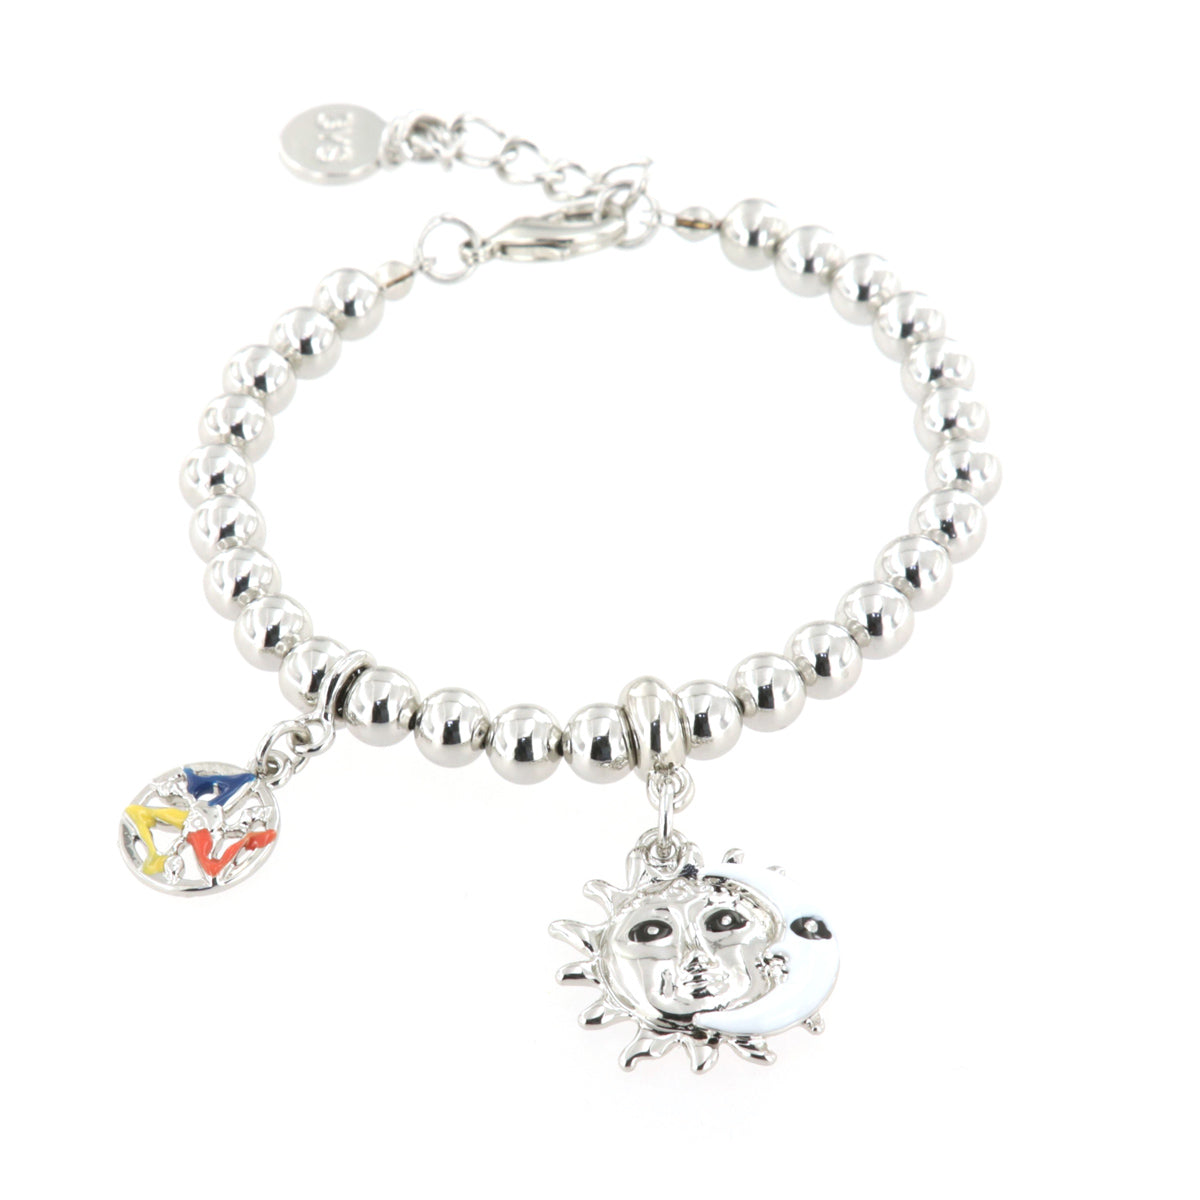 Metal bracelet spheres with charm sun and moon pendant, embellished with white enamel